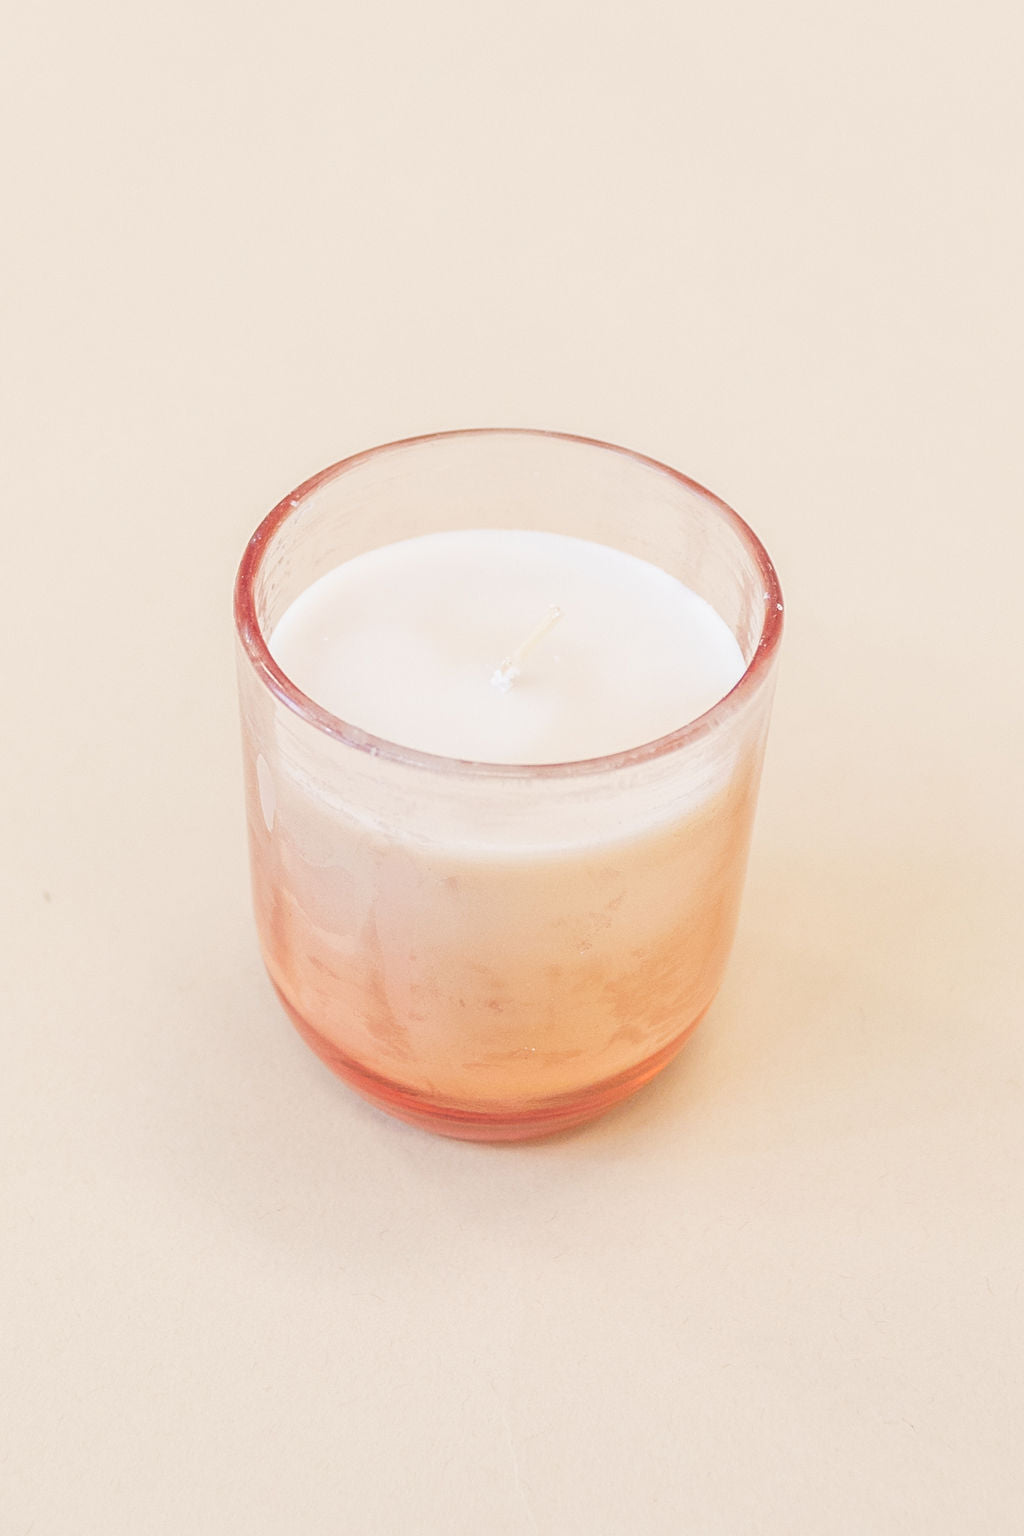 Paddywax | Enneagram Candle | The Helper - Poppy and Stella